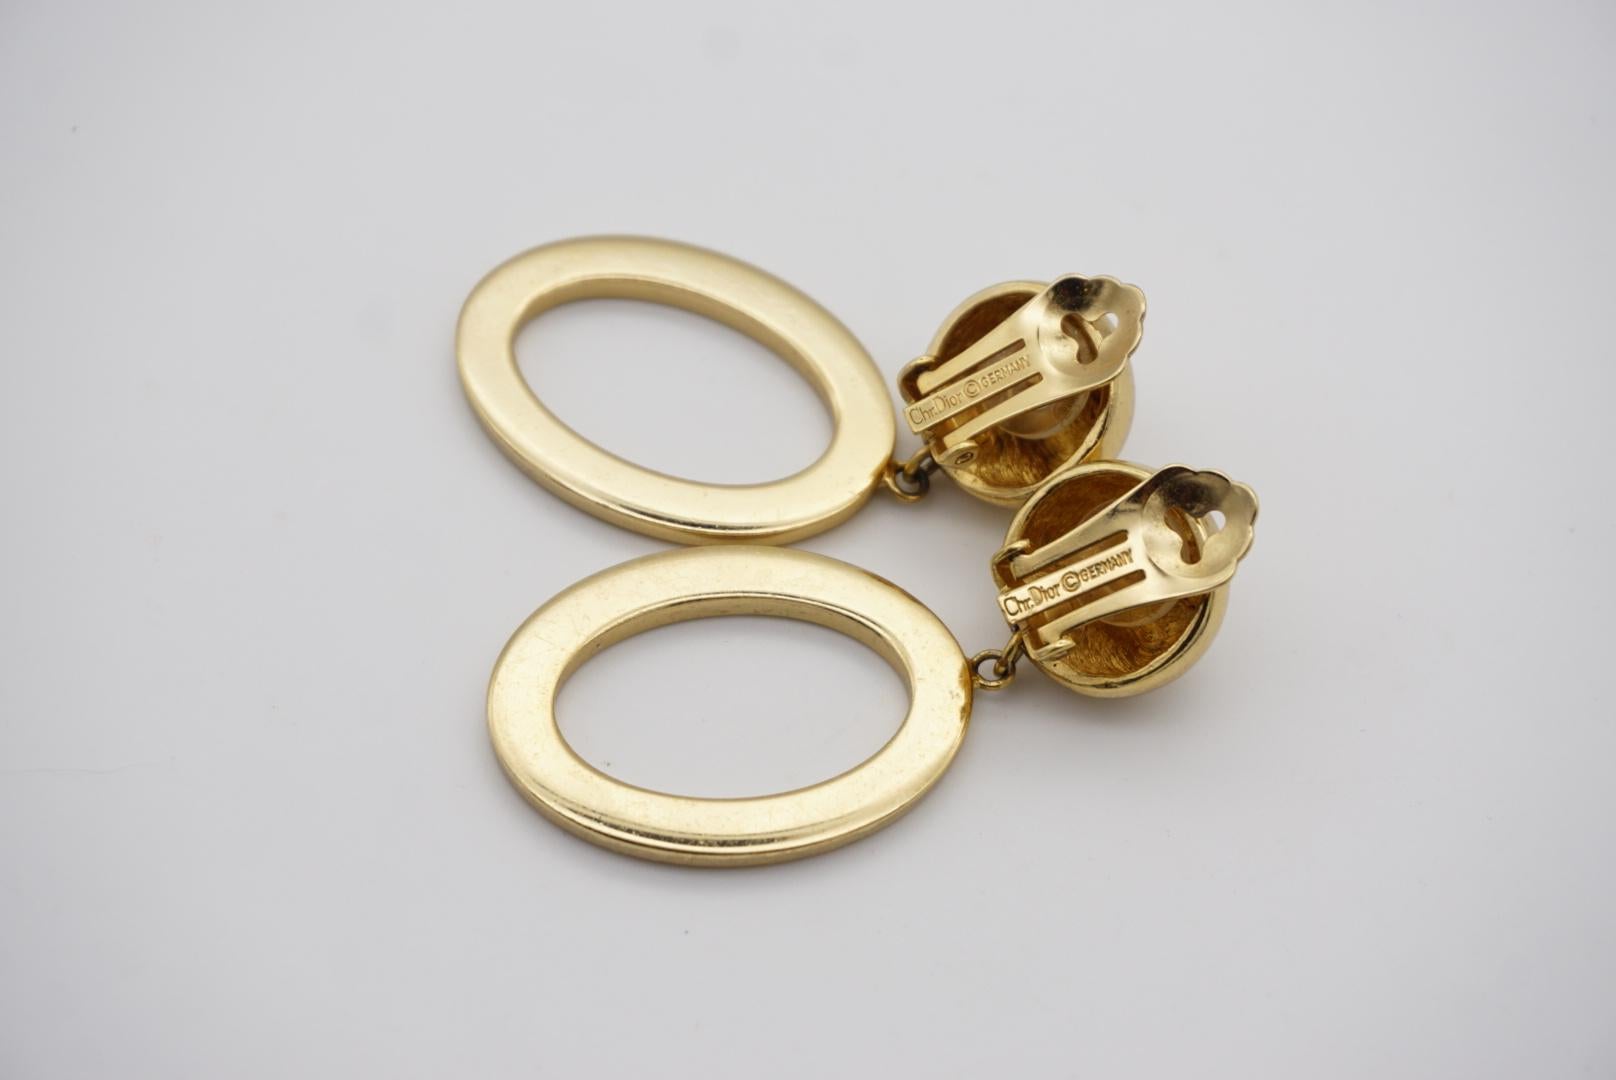 Christian Dior Vintage 1980s Long Oval Hoop Statement Gold Drop Clip Earrings In Excellent Condition For Sale In Wokingham, England